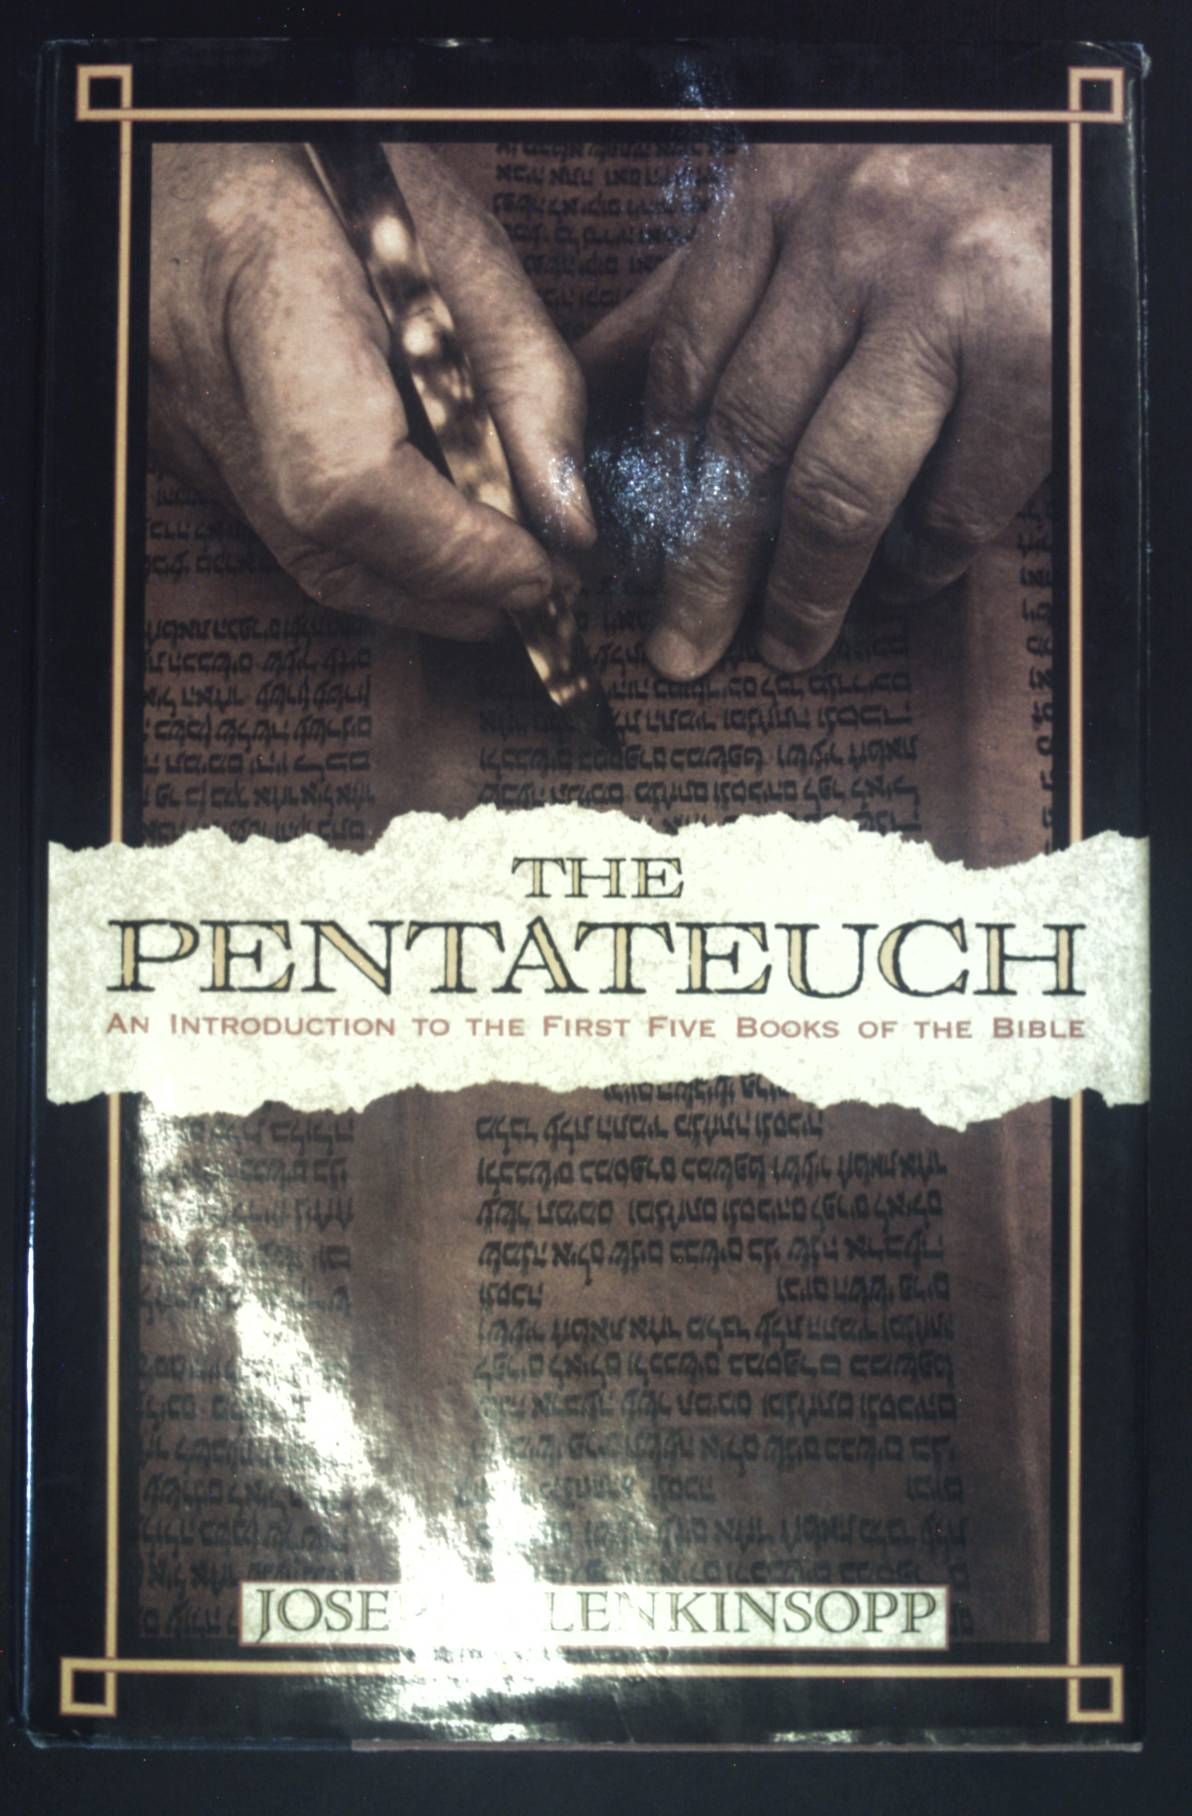 The Pentateuch: An Introduction to the First Five Books of the Bible. Anchor Bible Reference - Blenkinsopp, Joseph